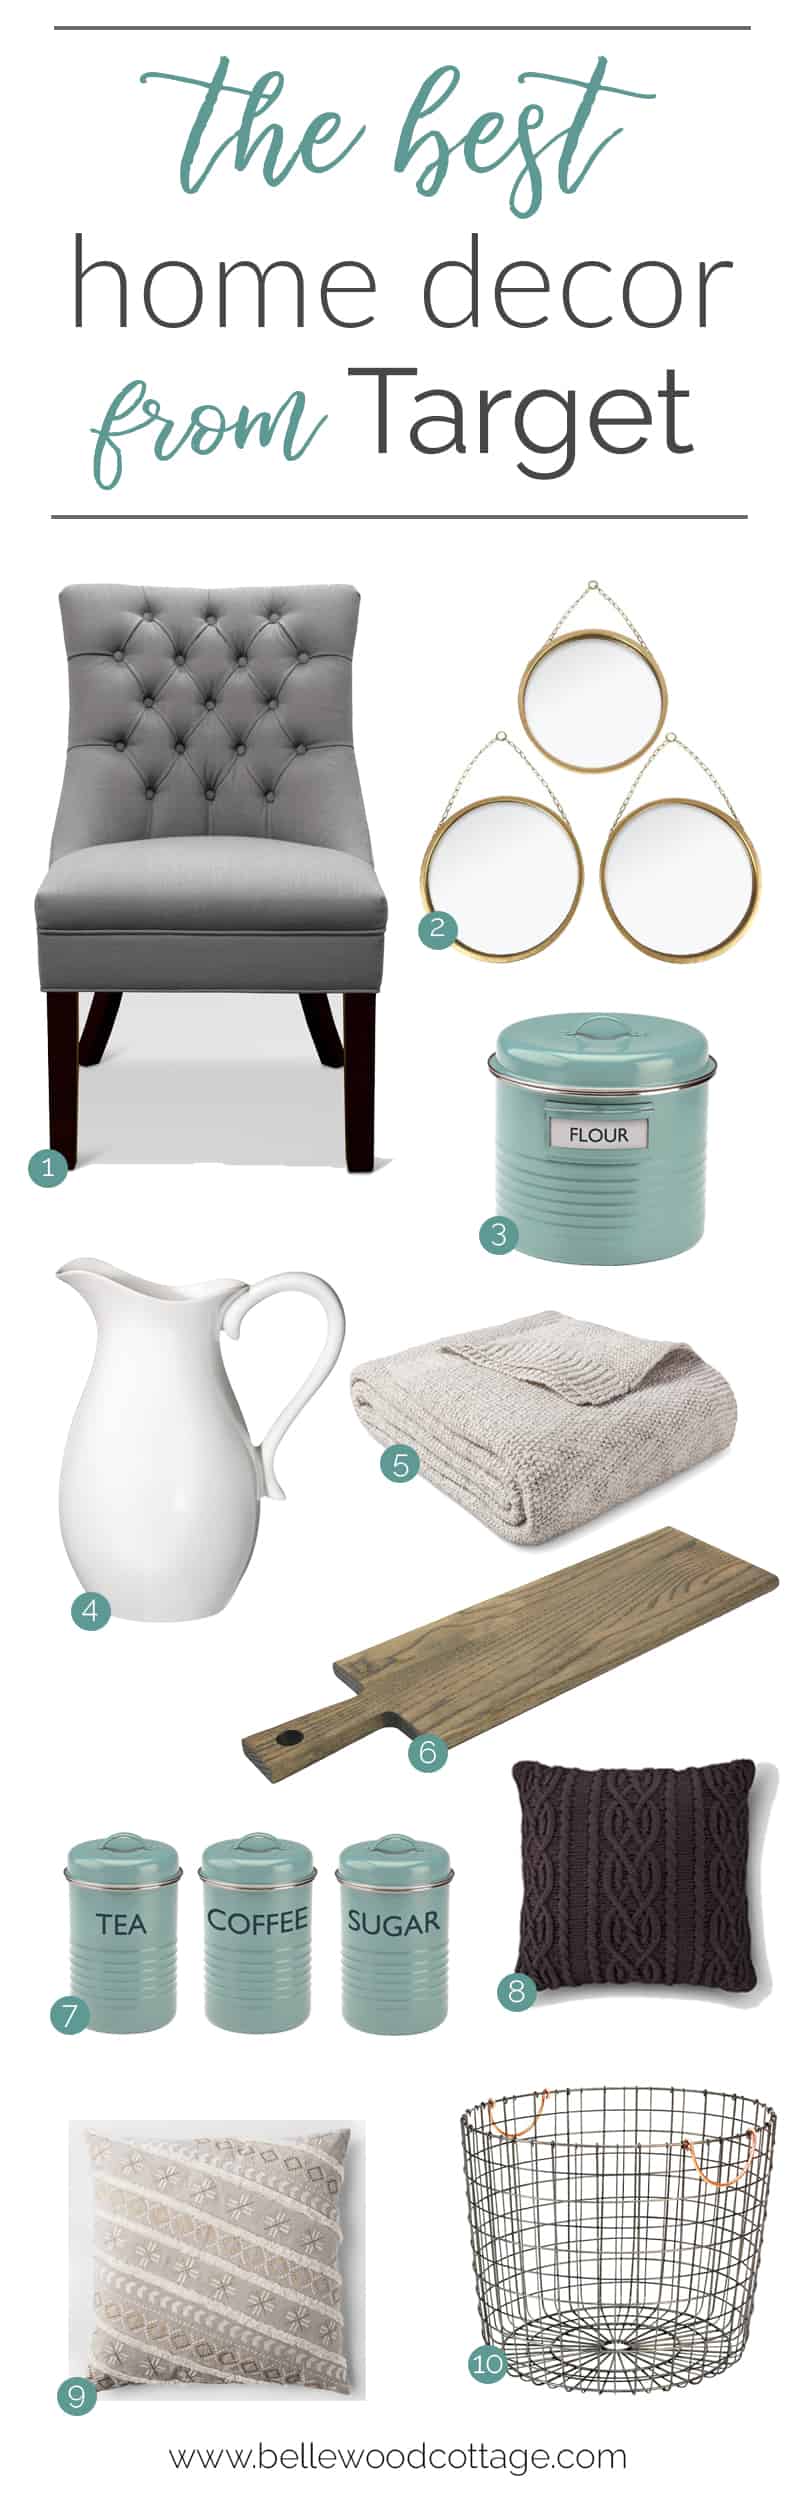 We all love to shop at Target, am I right? Check out this budget friendly round up of some of Target's best home decor. Curated by Bellewood Cottage.